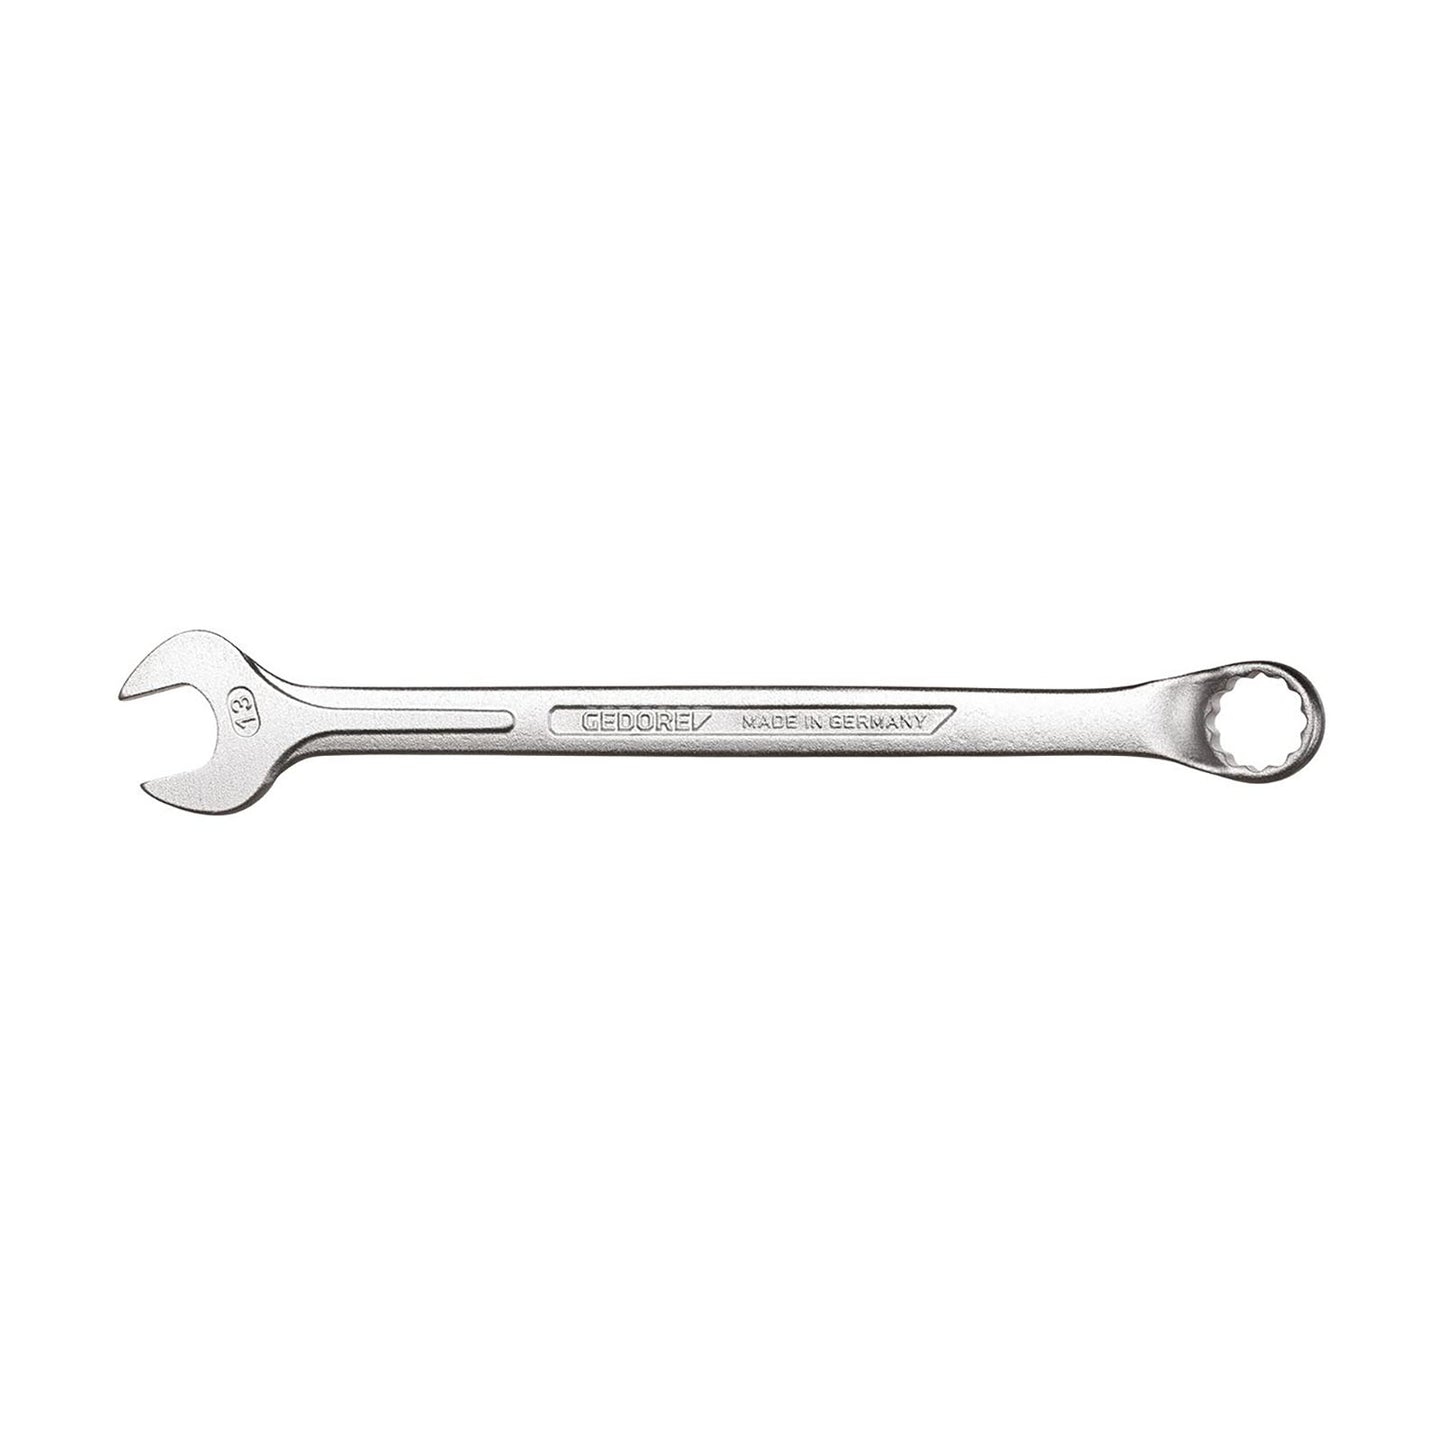 GEDORE 1 B 3/4W - Offset Combination Wrench, 3/4W (6010550)